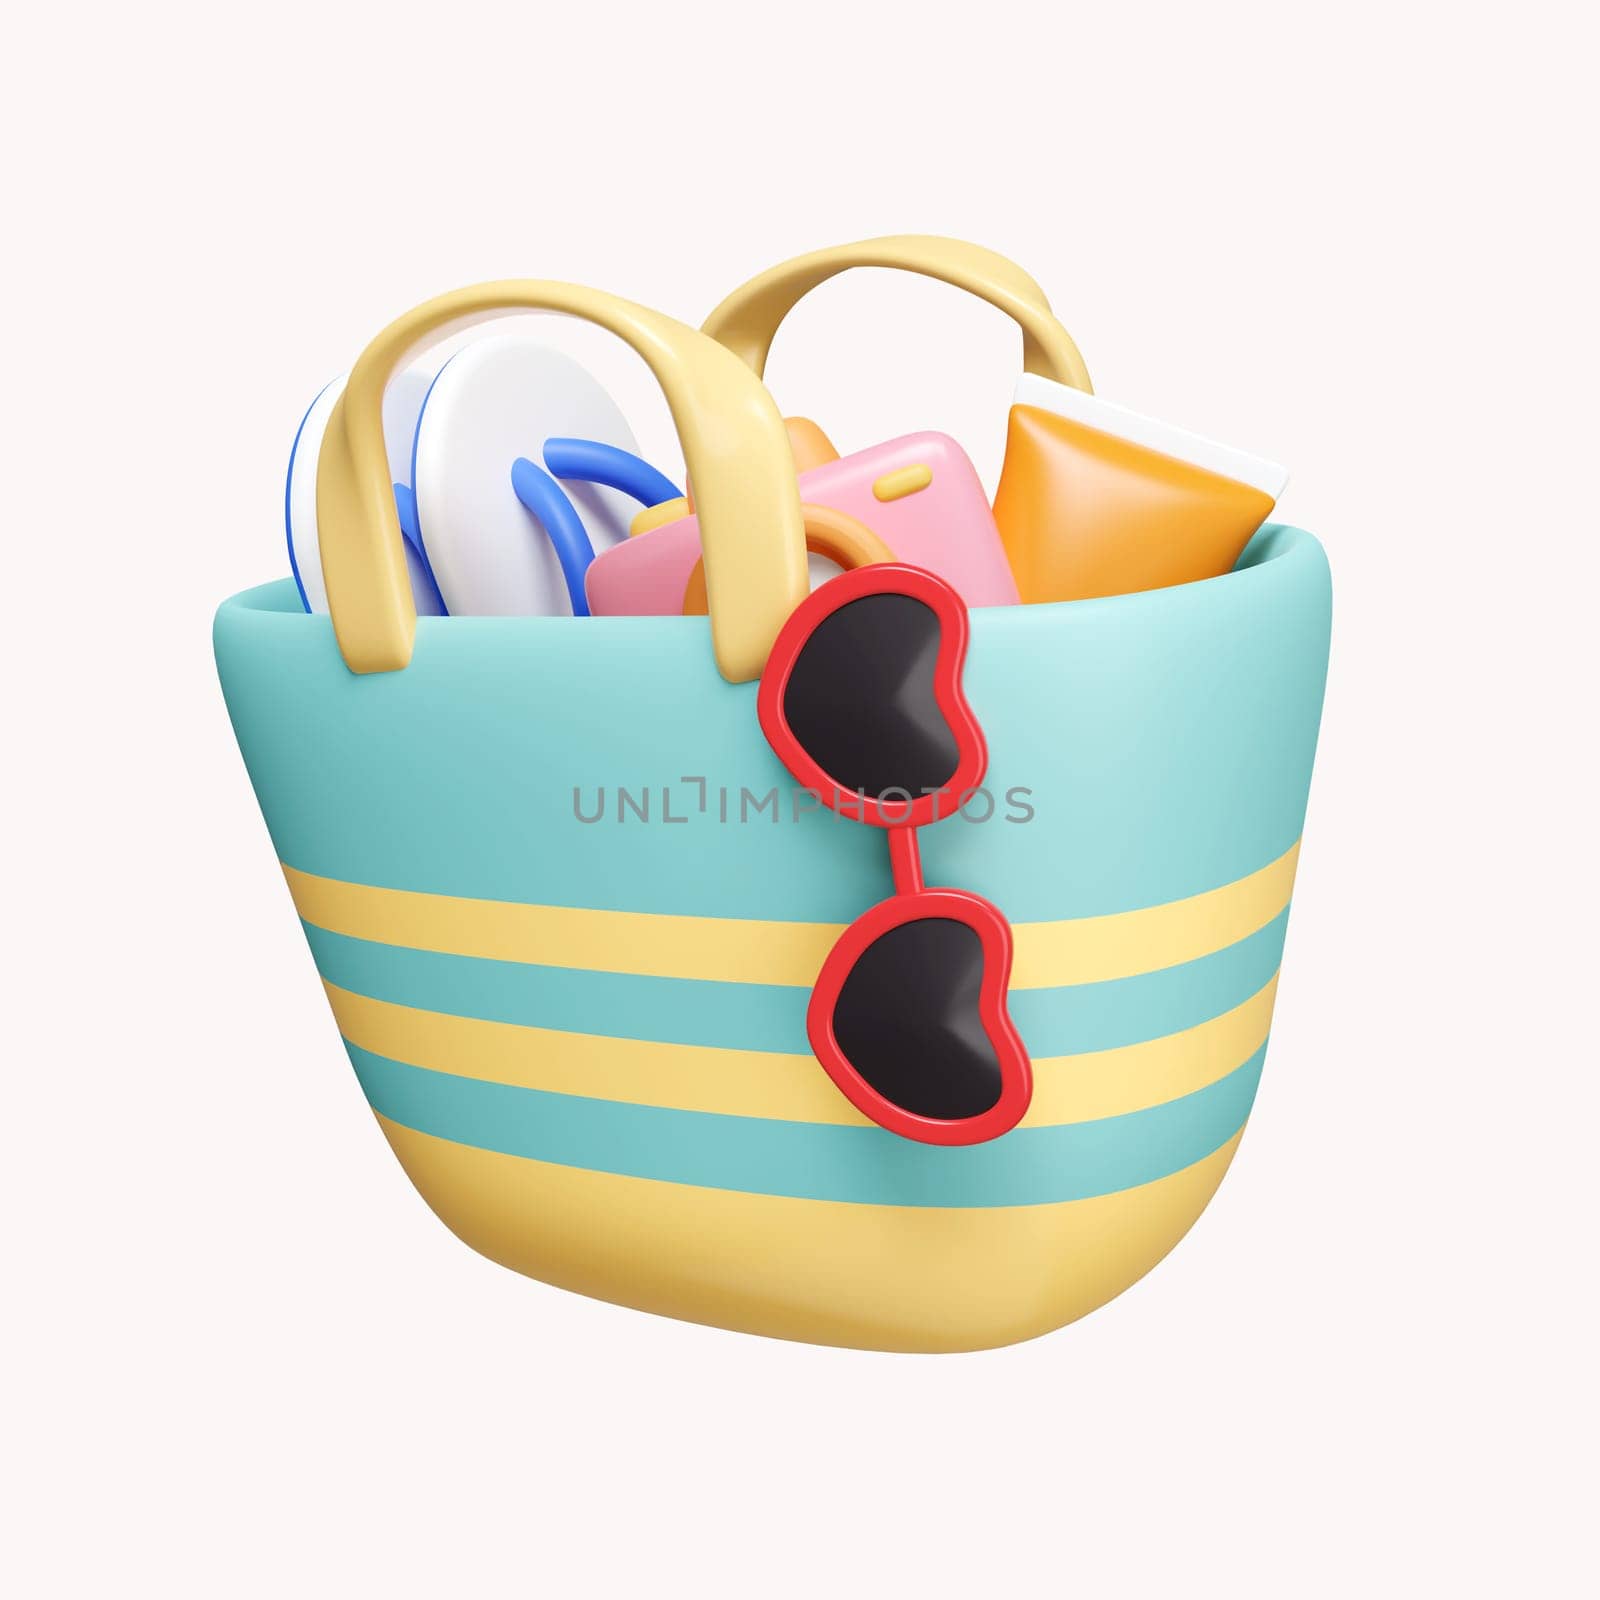 3d bag with sandals, camera, sunscreen and sun glasses. summer vacation and holidays concept. icon isolated on white background. 3d rendering illustration. Clipping path. by meepiangraphic